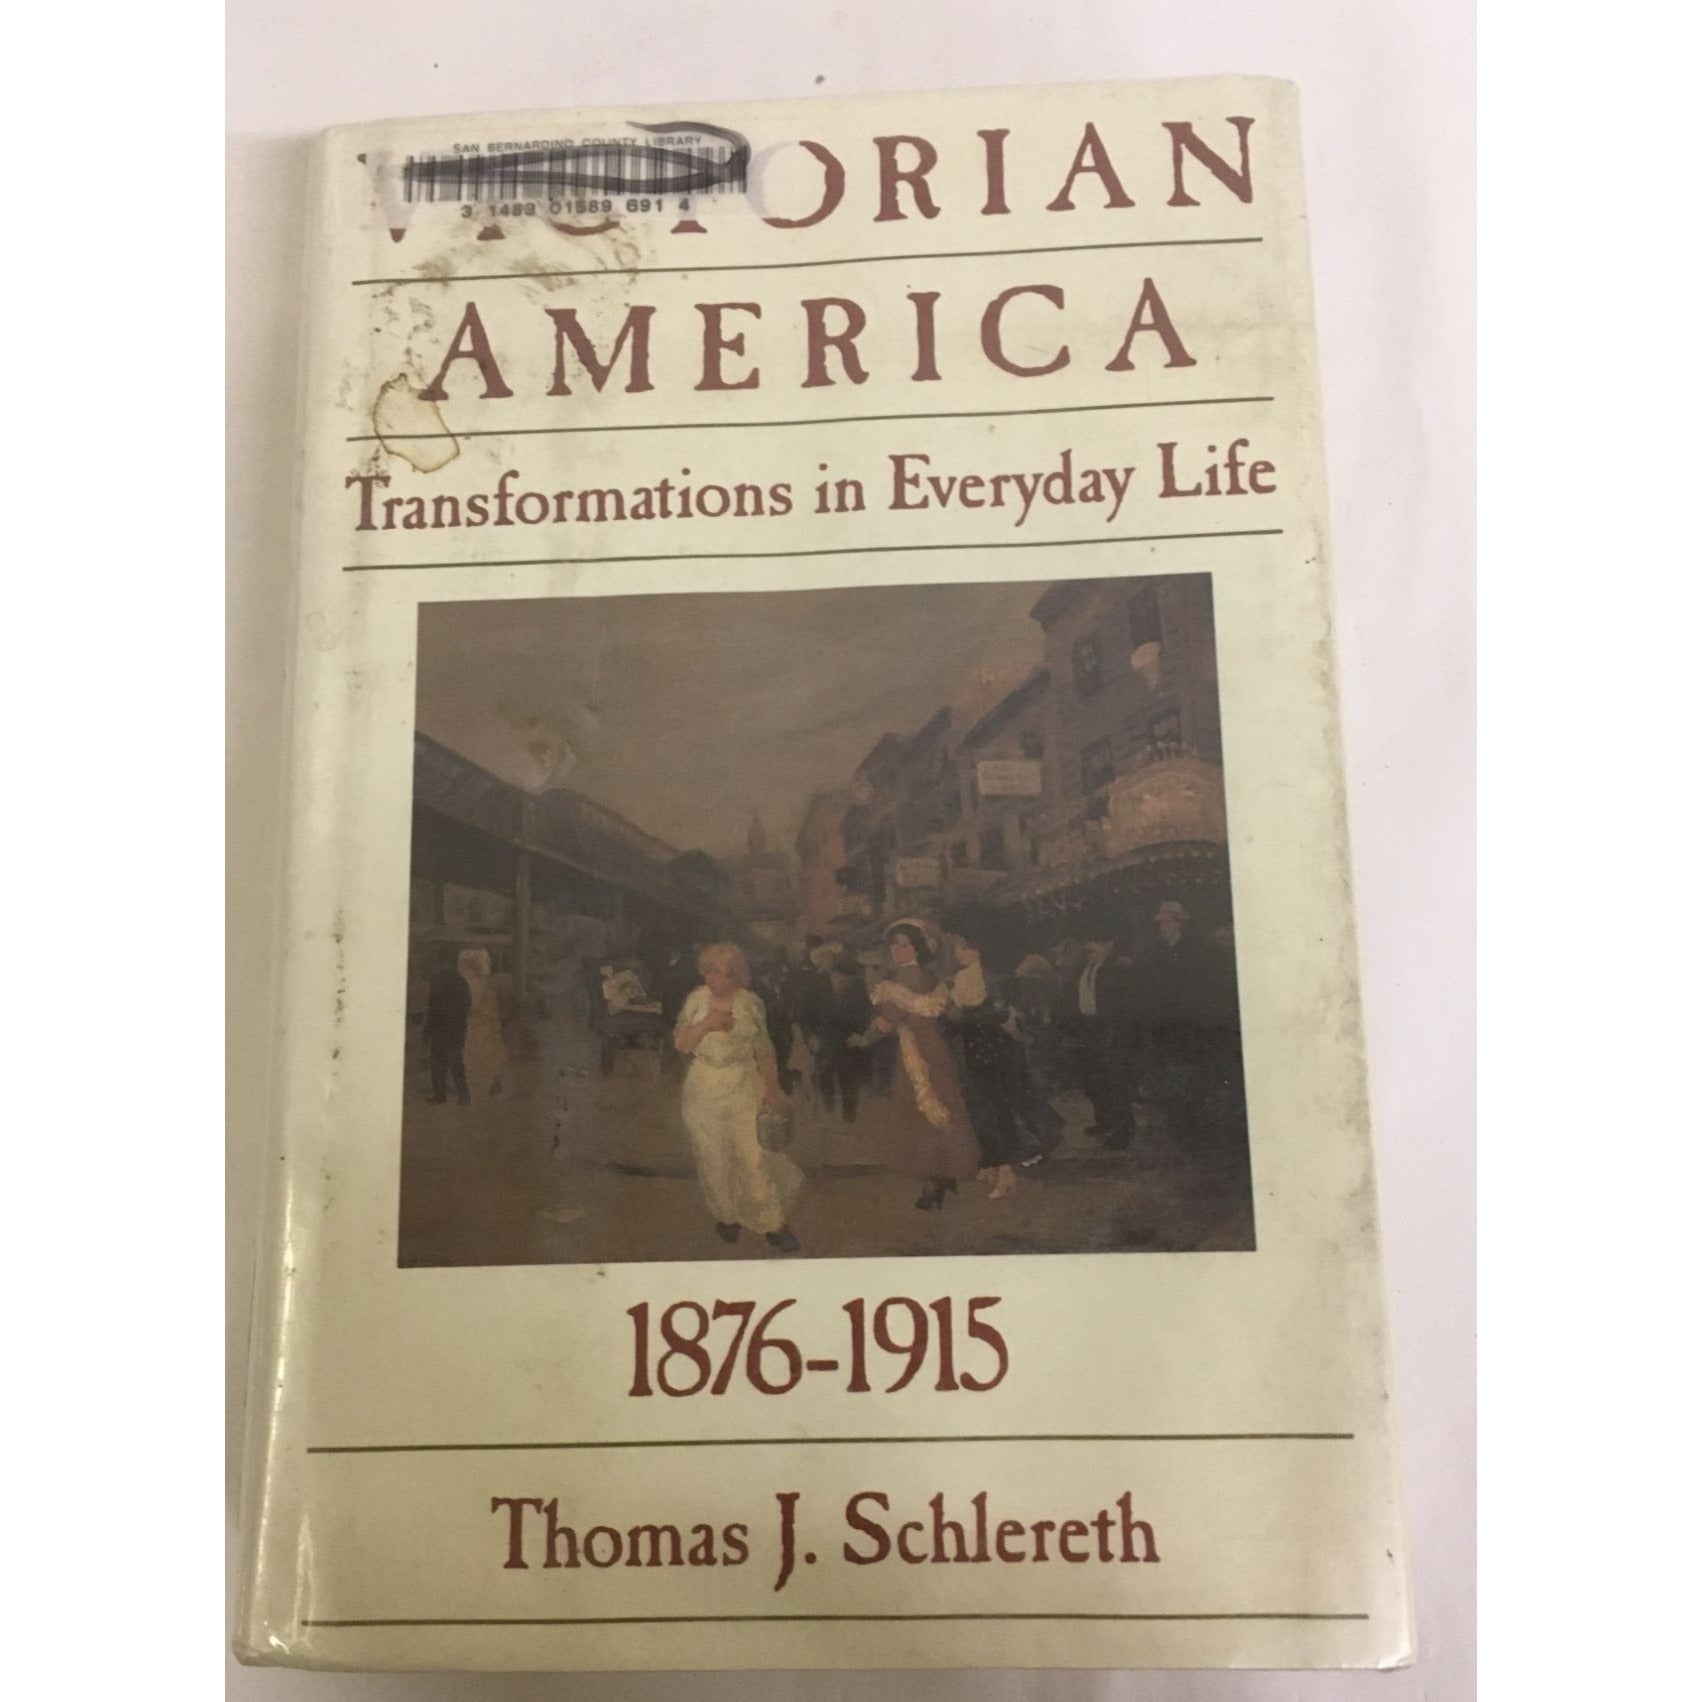 Victorian America: Transformations in Everyday Life by Thomas J. Schlereth book